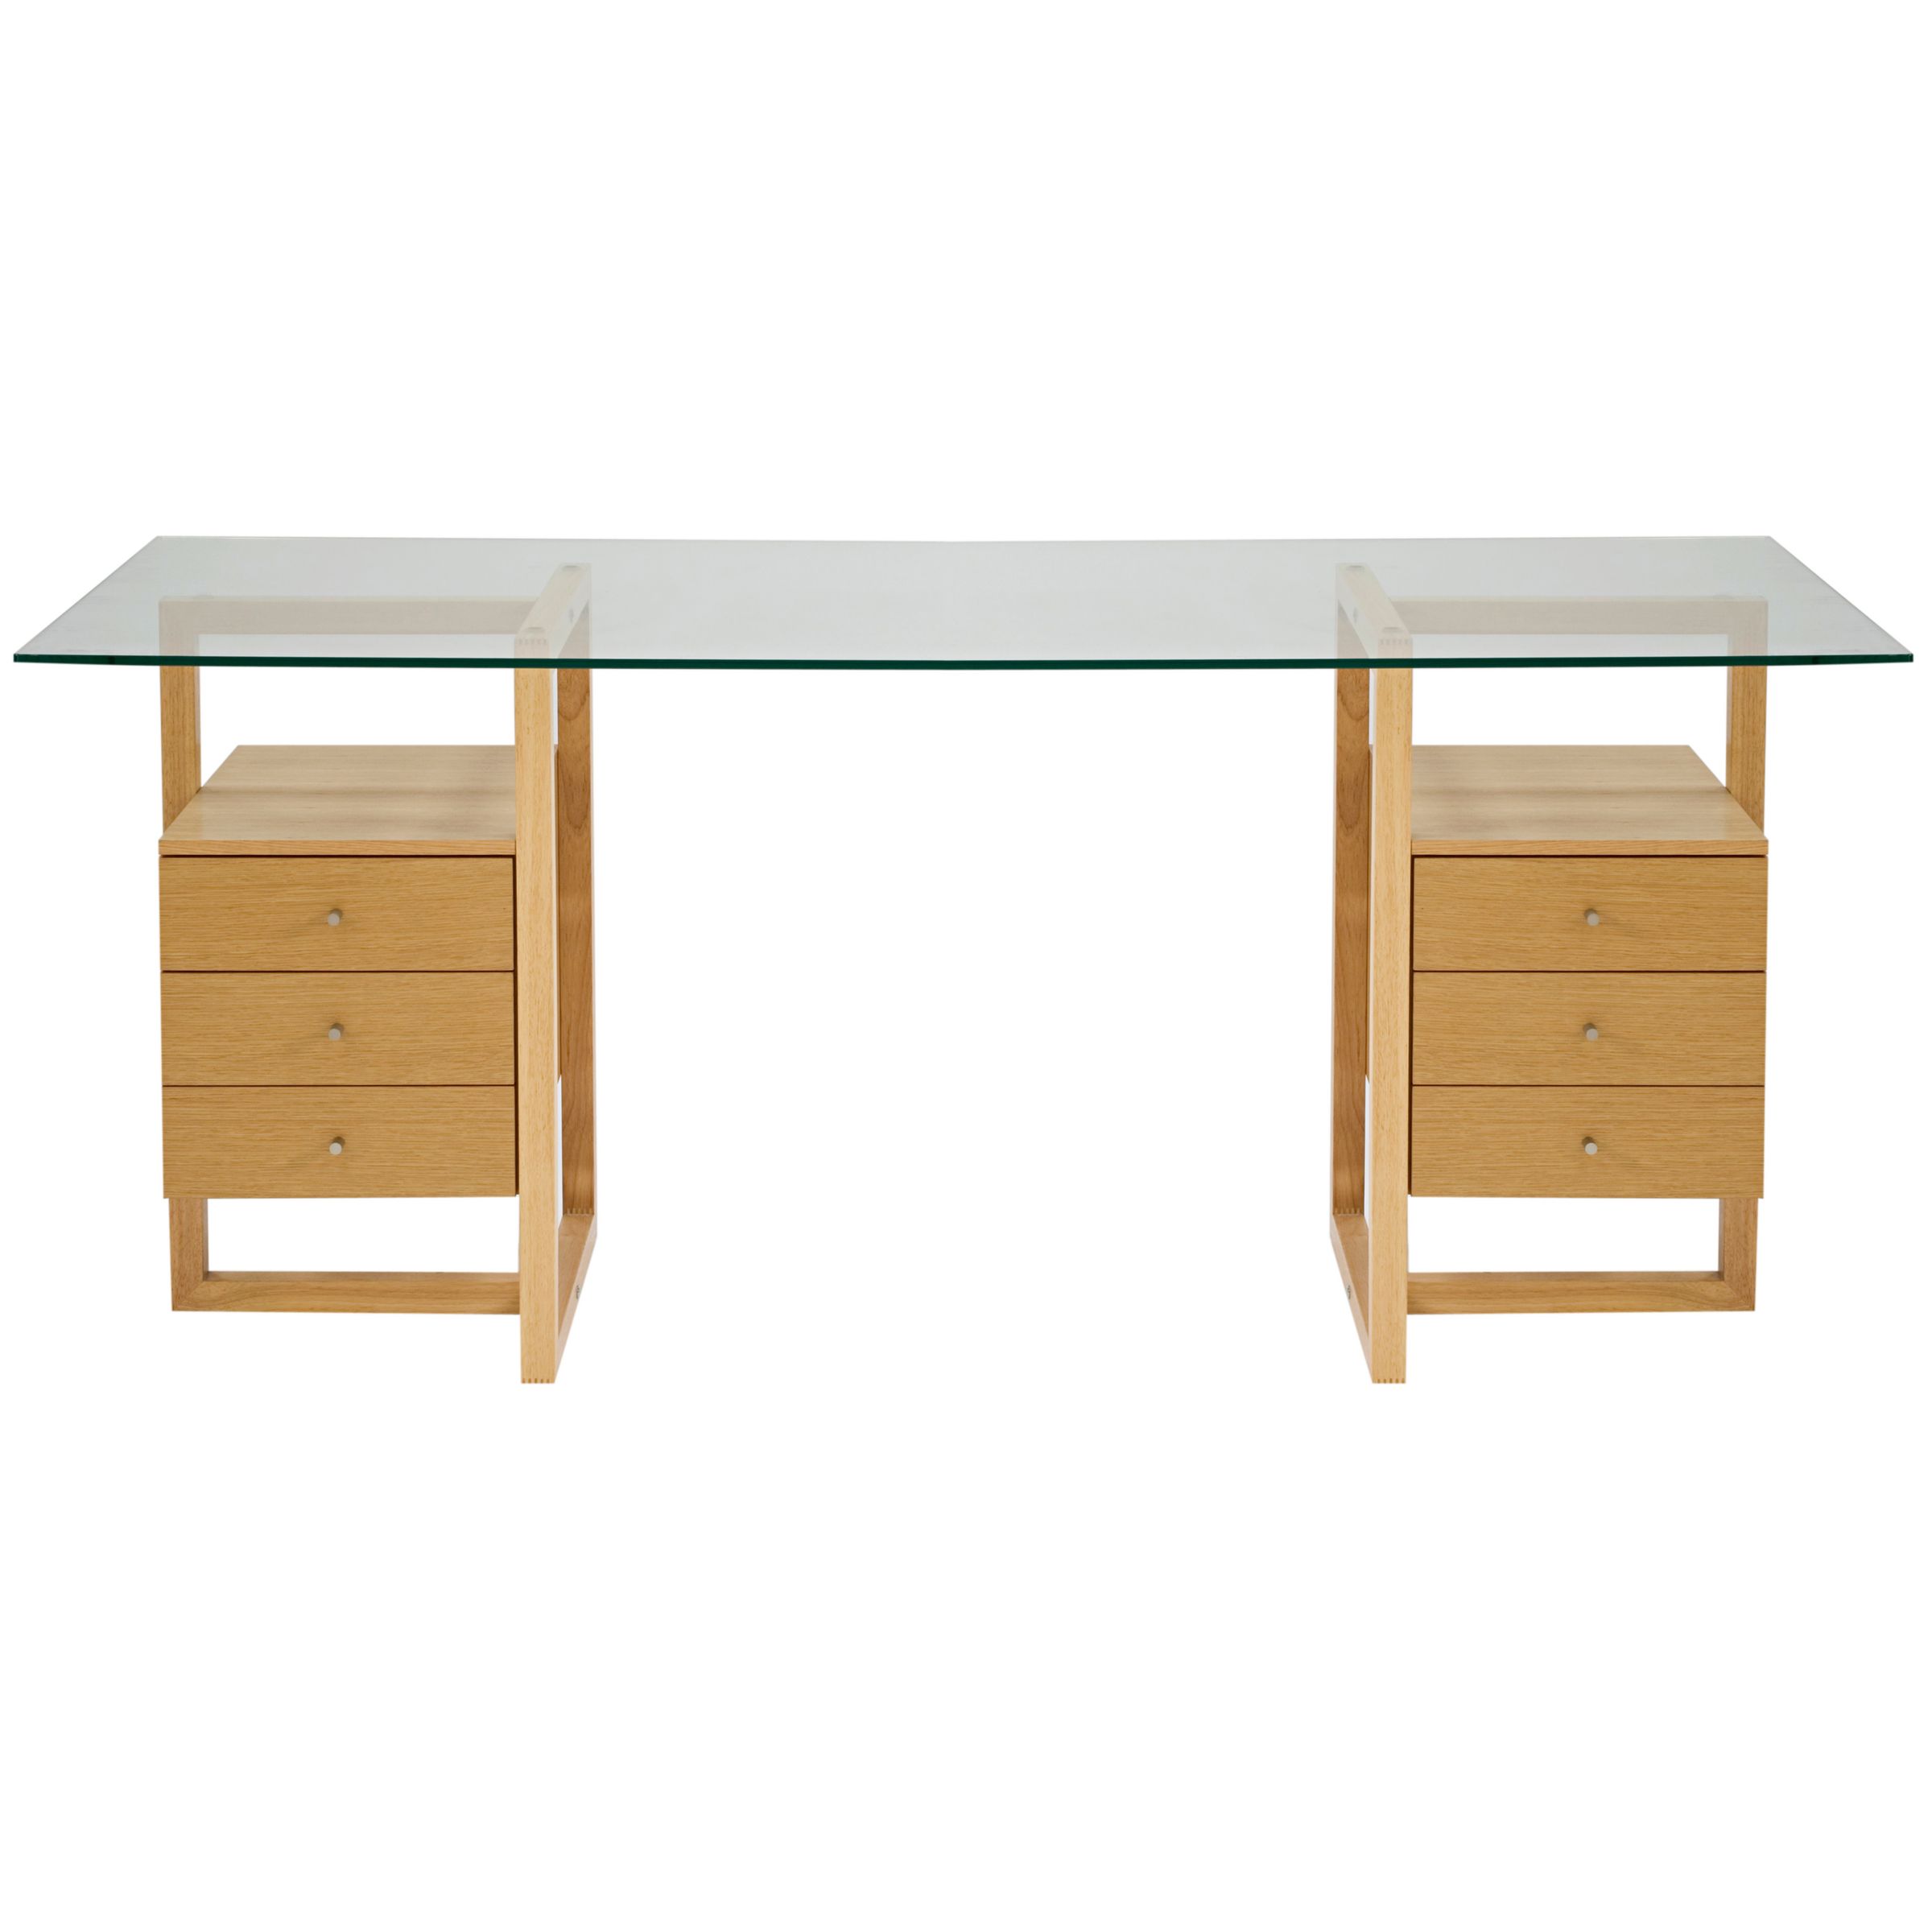 Staten Large Glass Desk with Oak Trestles and 2 Drawer Packs